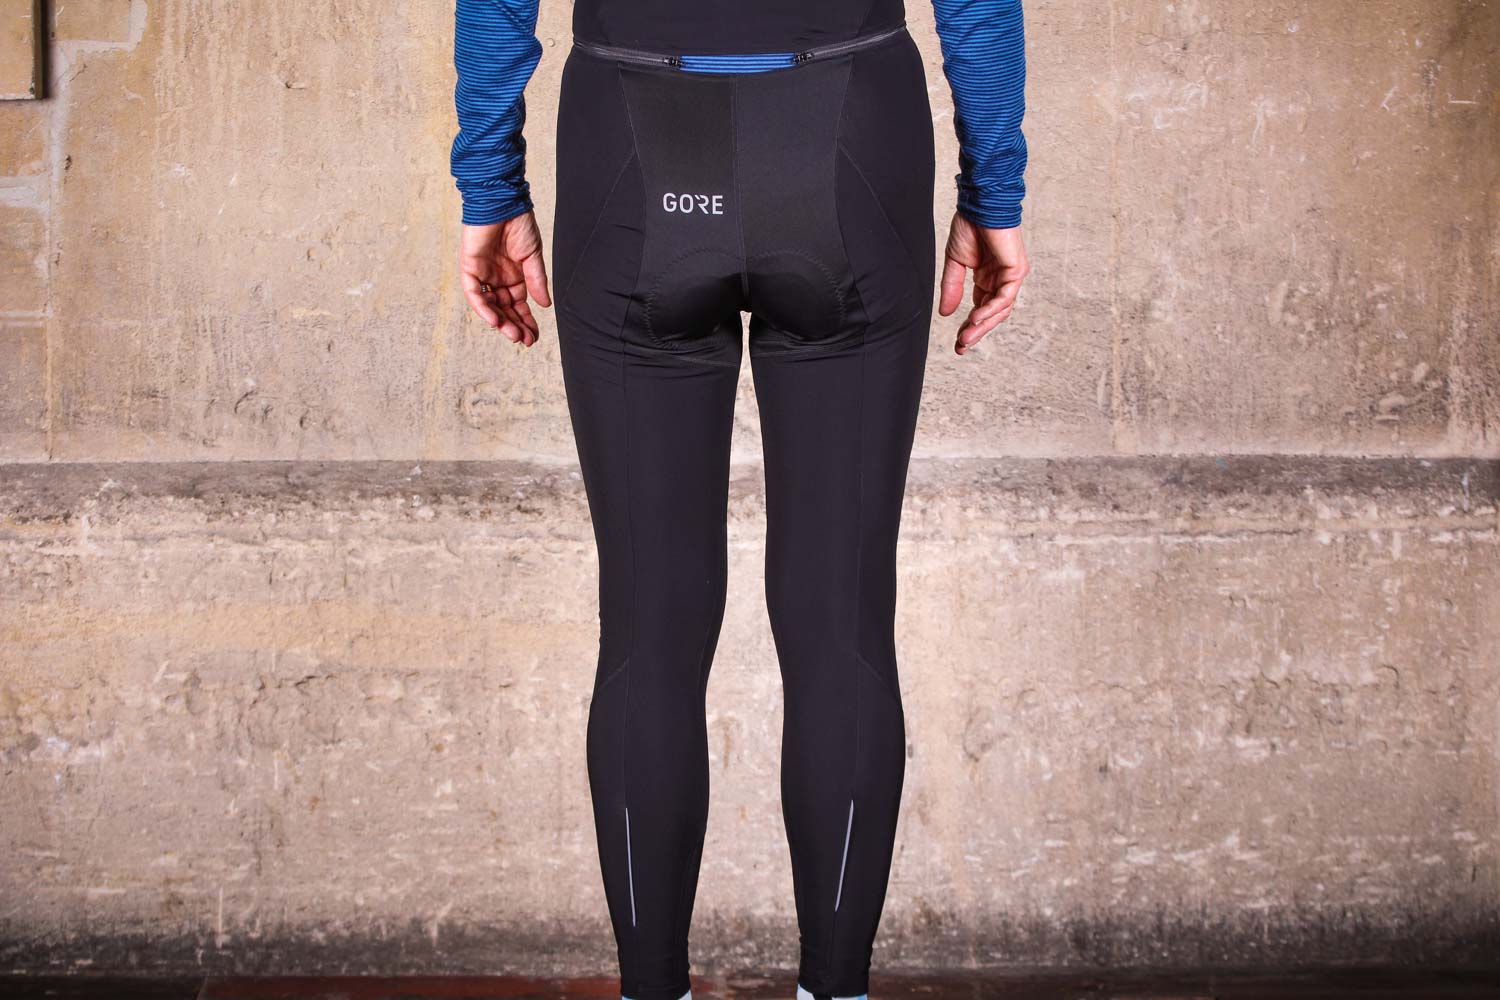 gore cycling tights